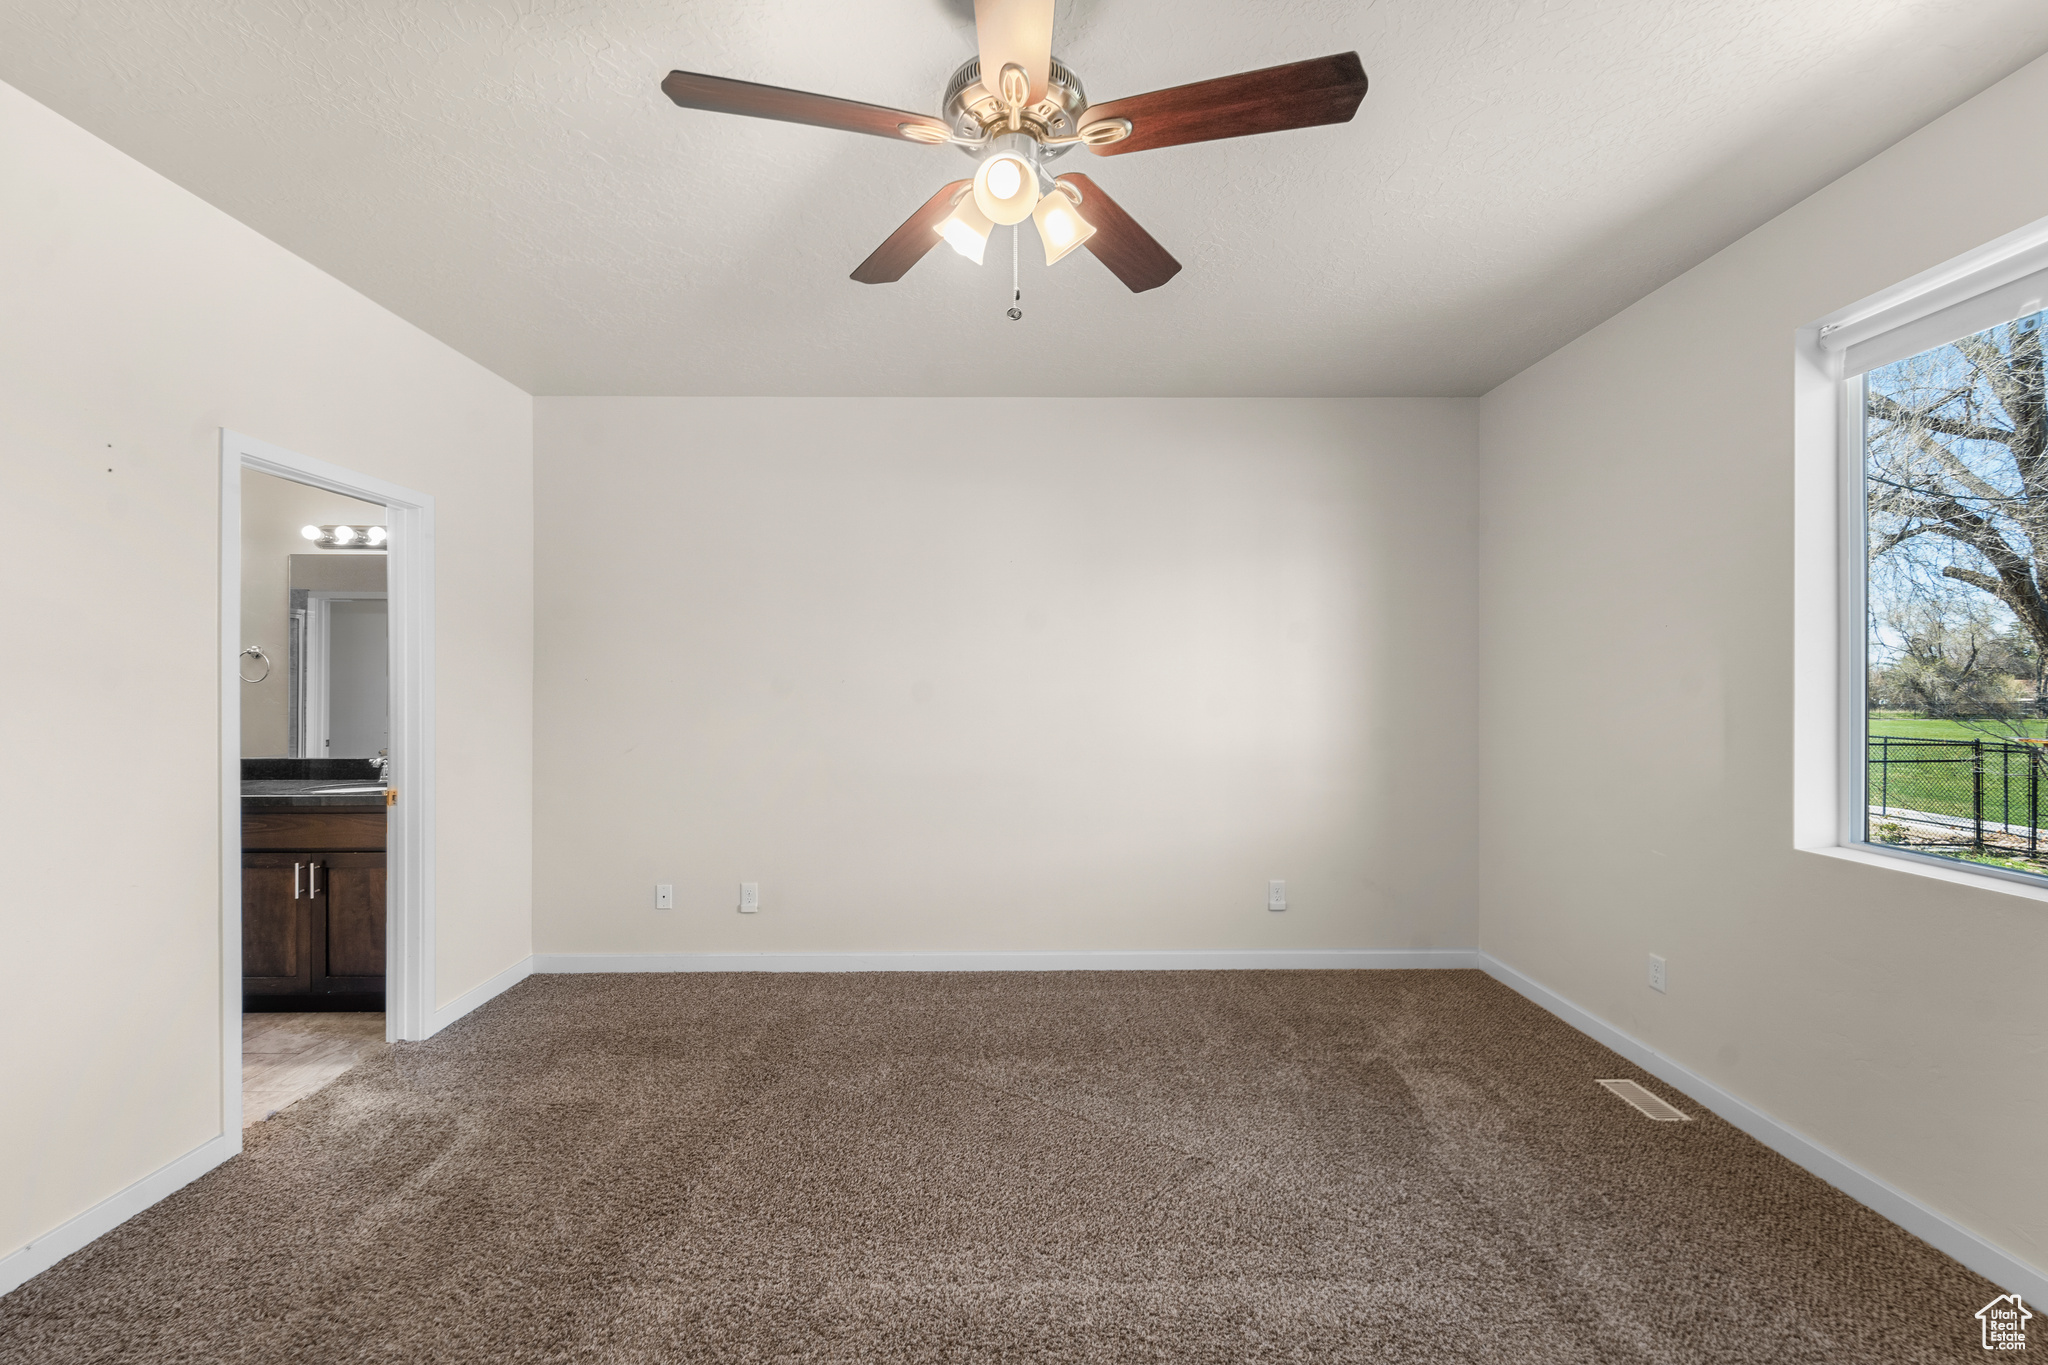 Carpeted spare room with sink, ceiling fan, and a healthy amount of sunlight